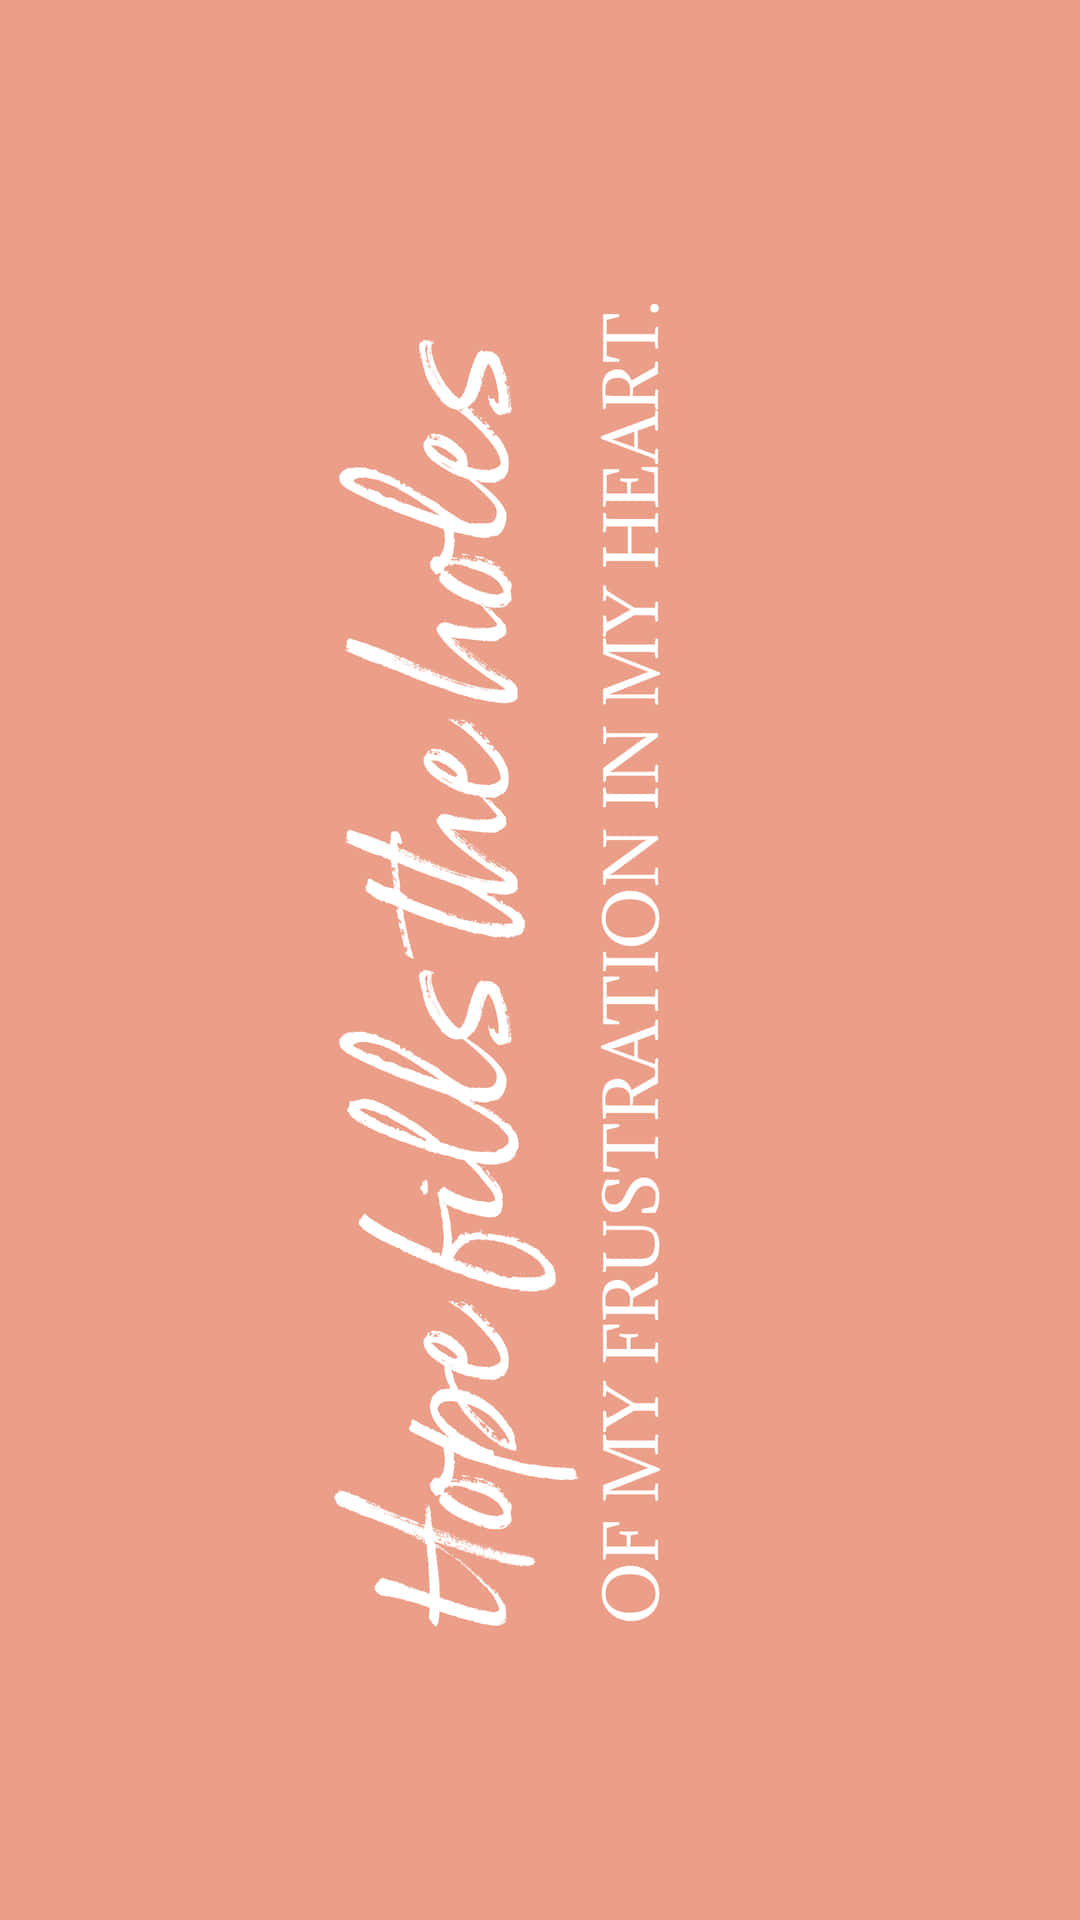 A quote on an orange background with white text - Salmon